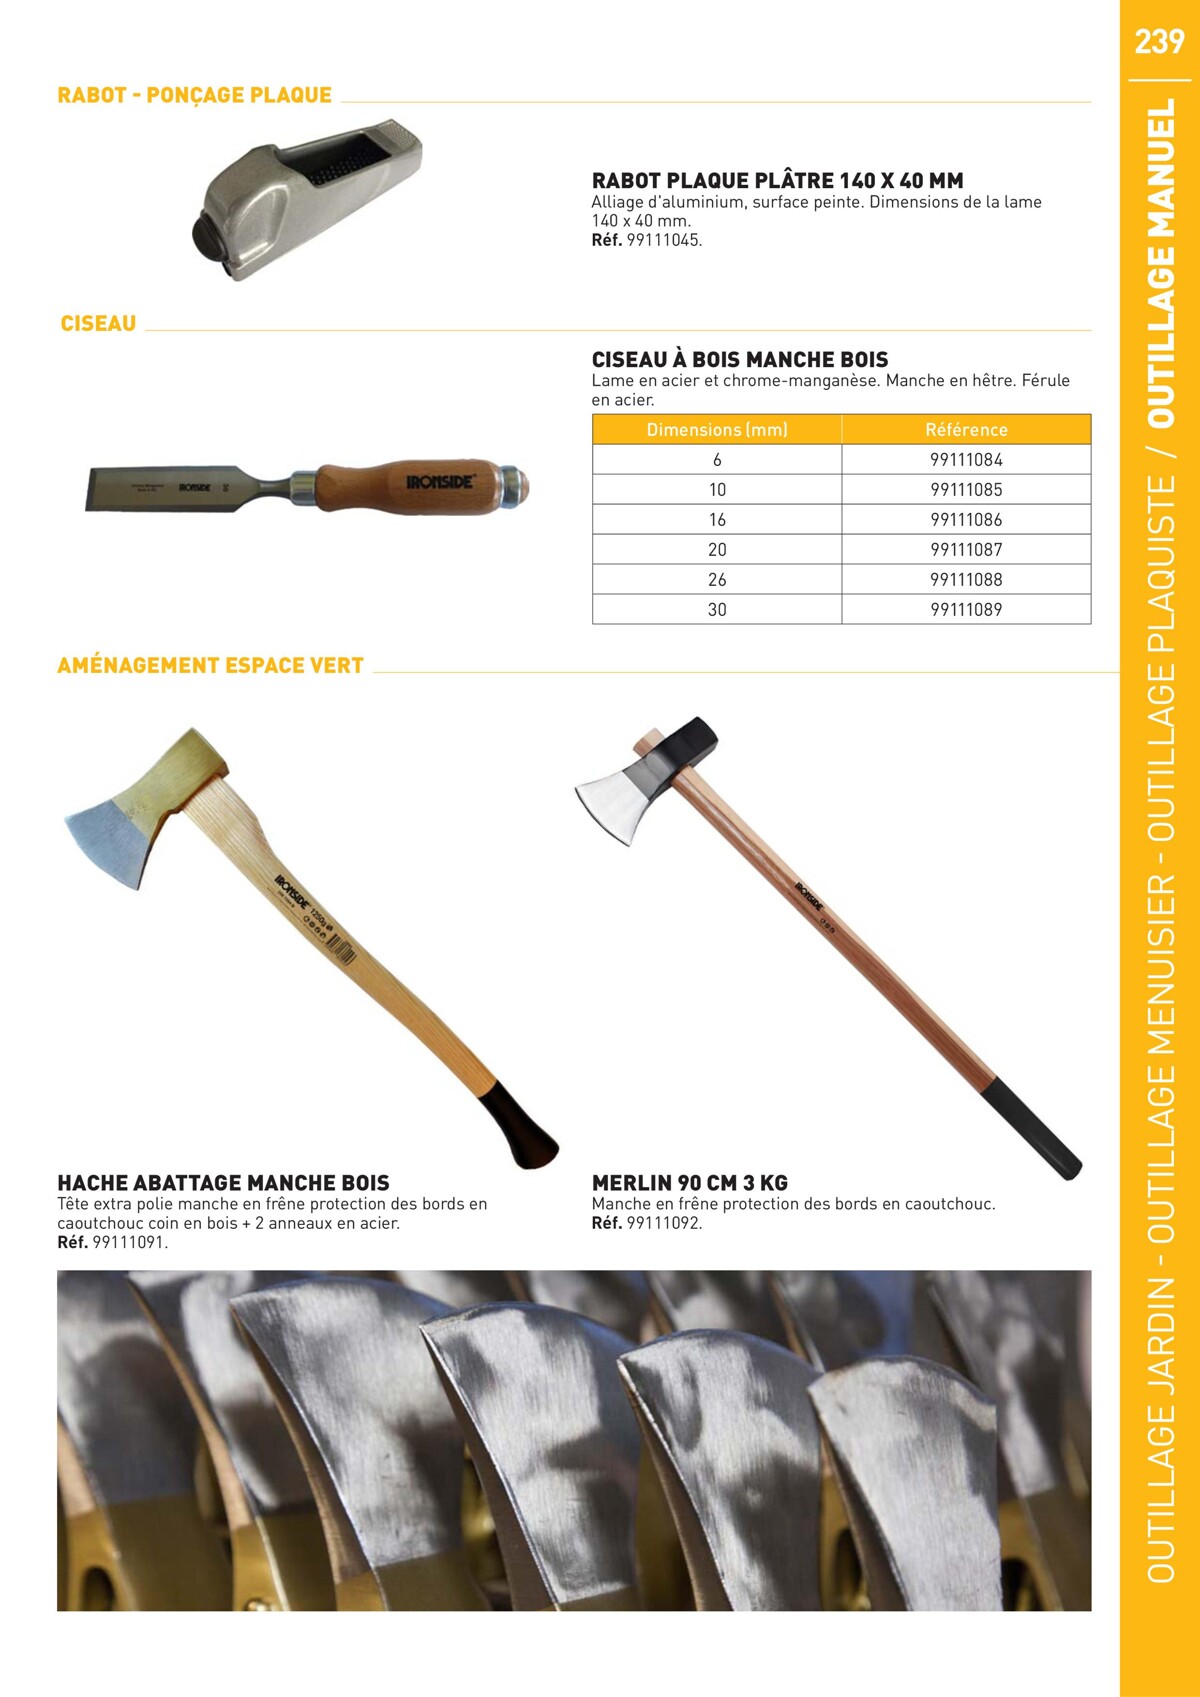 Catalogue Special Outillage et equipments, page 00239